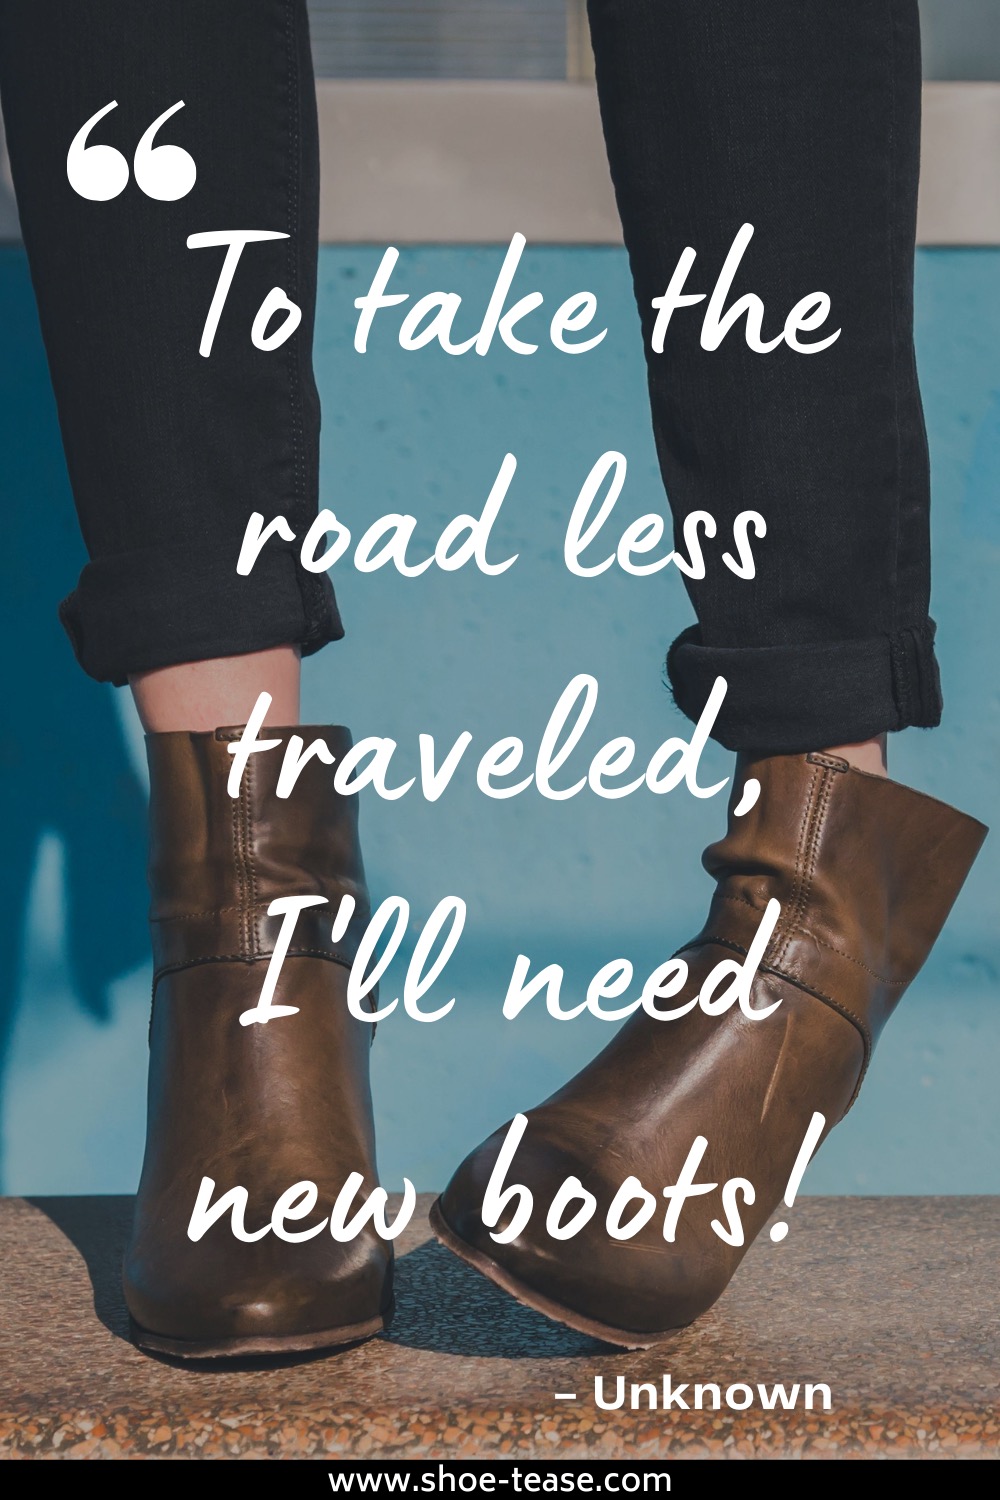 Text reading to take the road less traveled, I'll need new boots by Unknown over image of woman's legs in brown ankle boots and black jeans.